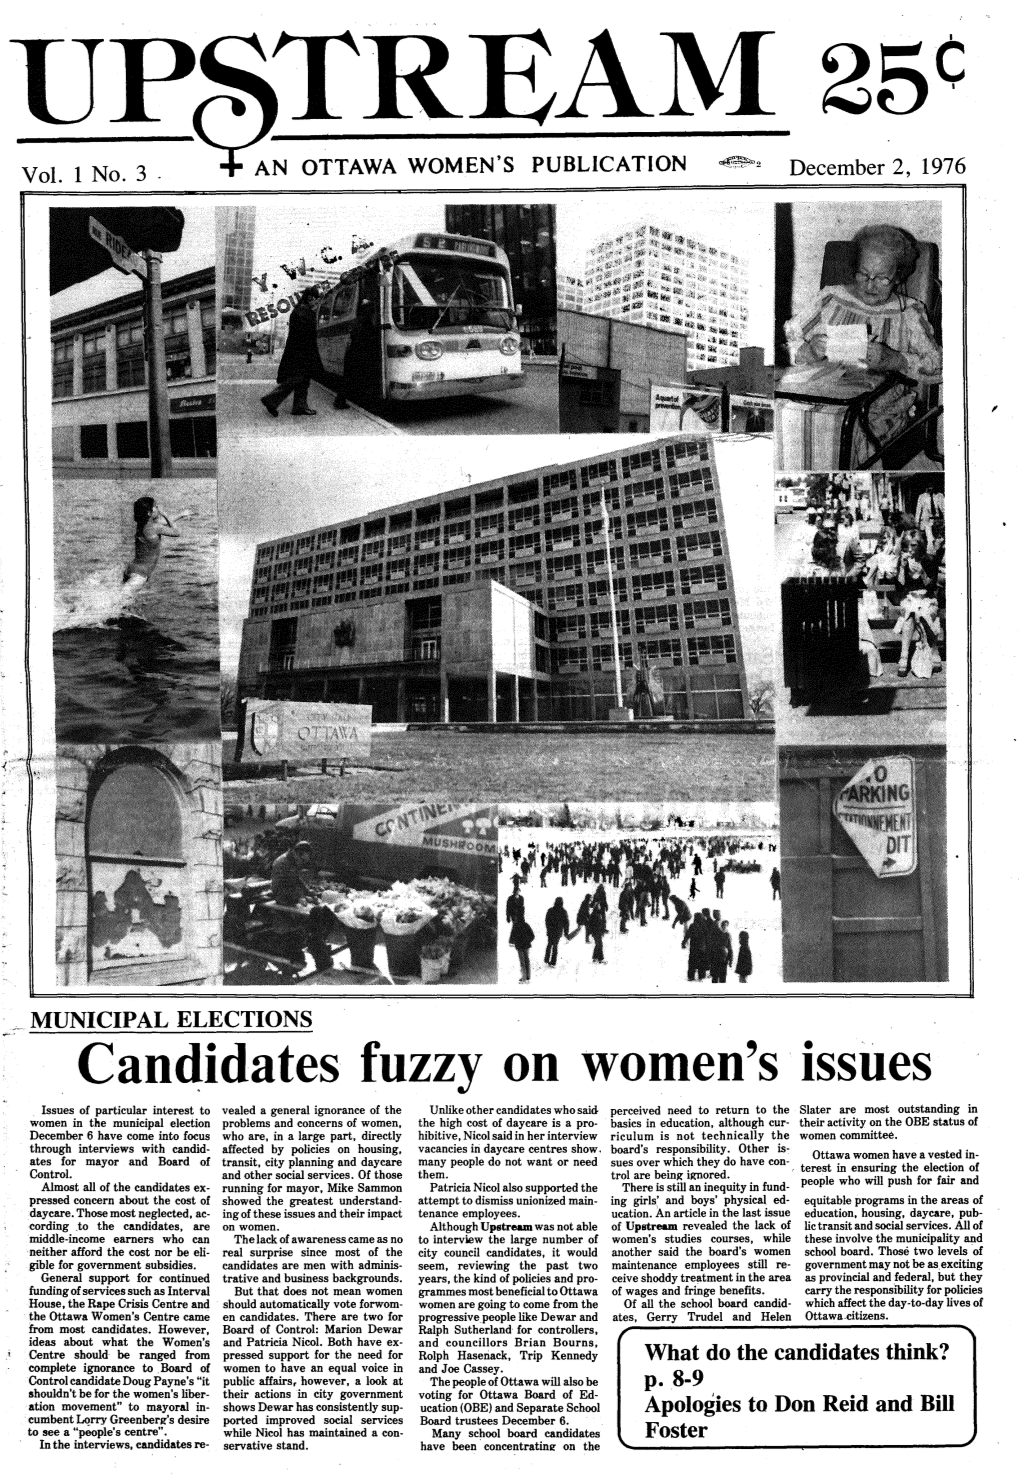 Candidates Fuzzy on Women's · Isslles